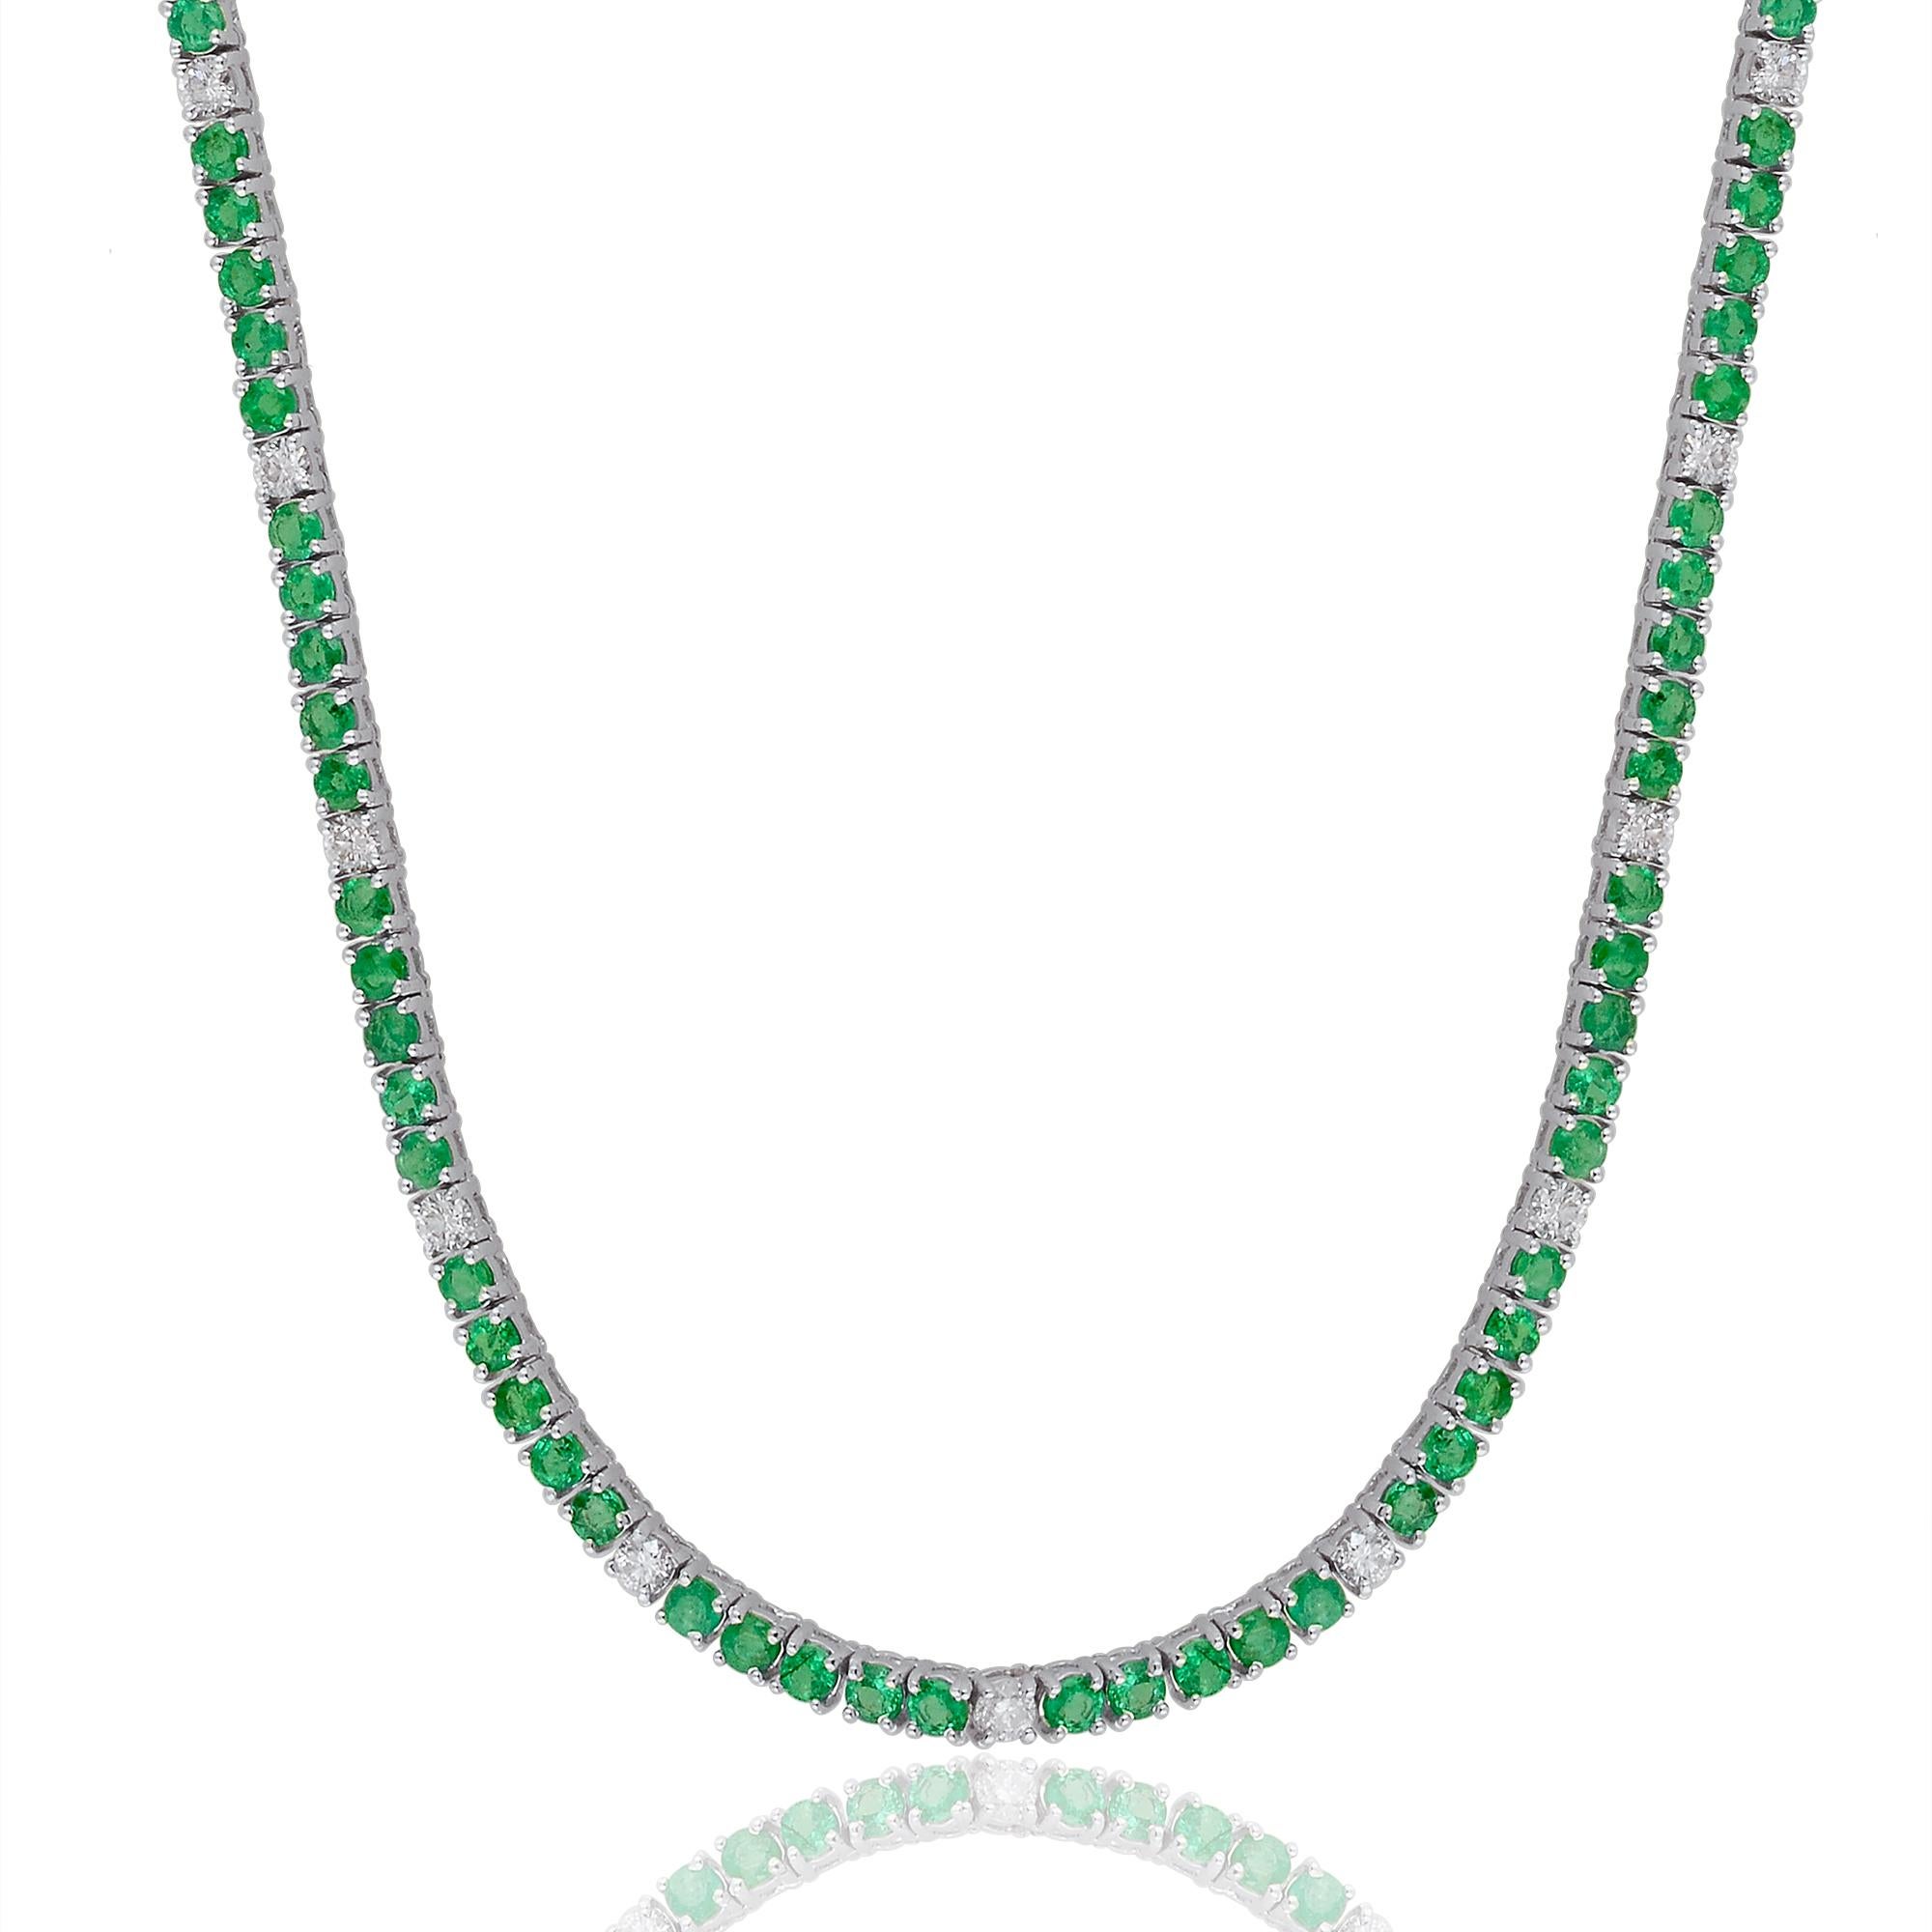 Set the trend with this stylish 10k White Gold Necklace studded with Emerald sparkling. Give your looks a little treat by wearing this exclusive ornament.

✧✧Welcome To Our Shop Spectrum Jewels ✧✧

